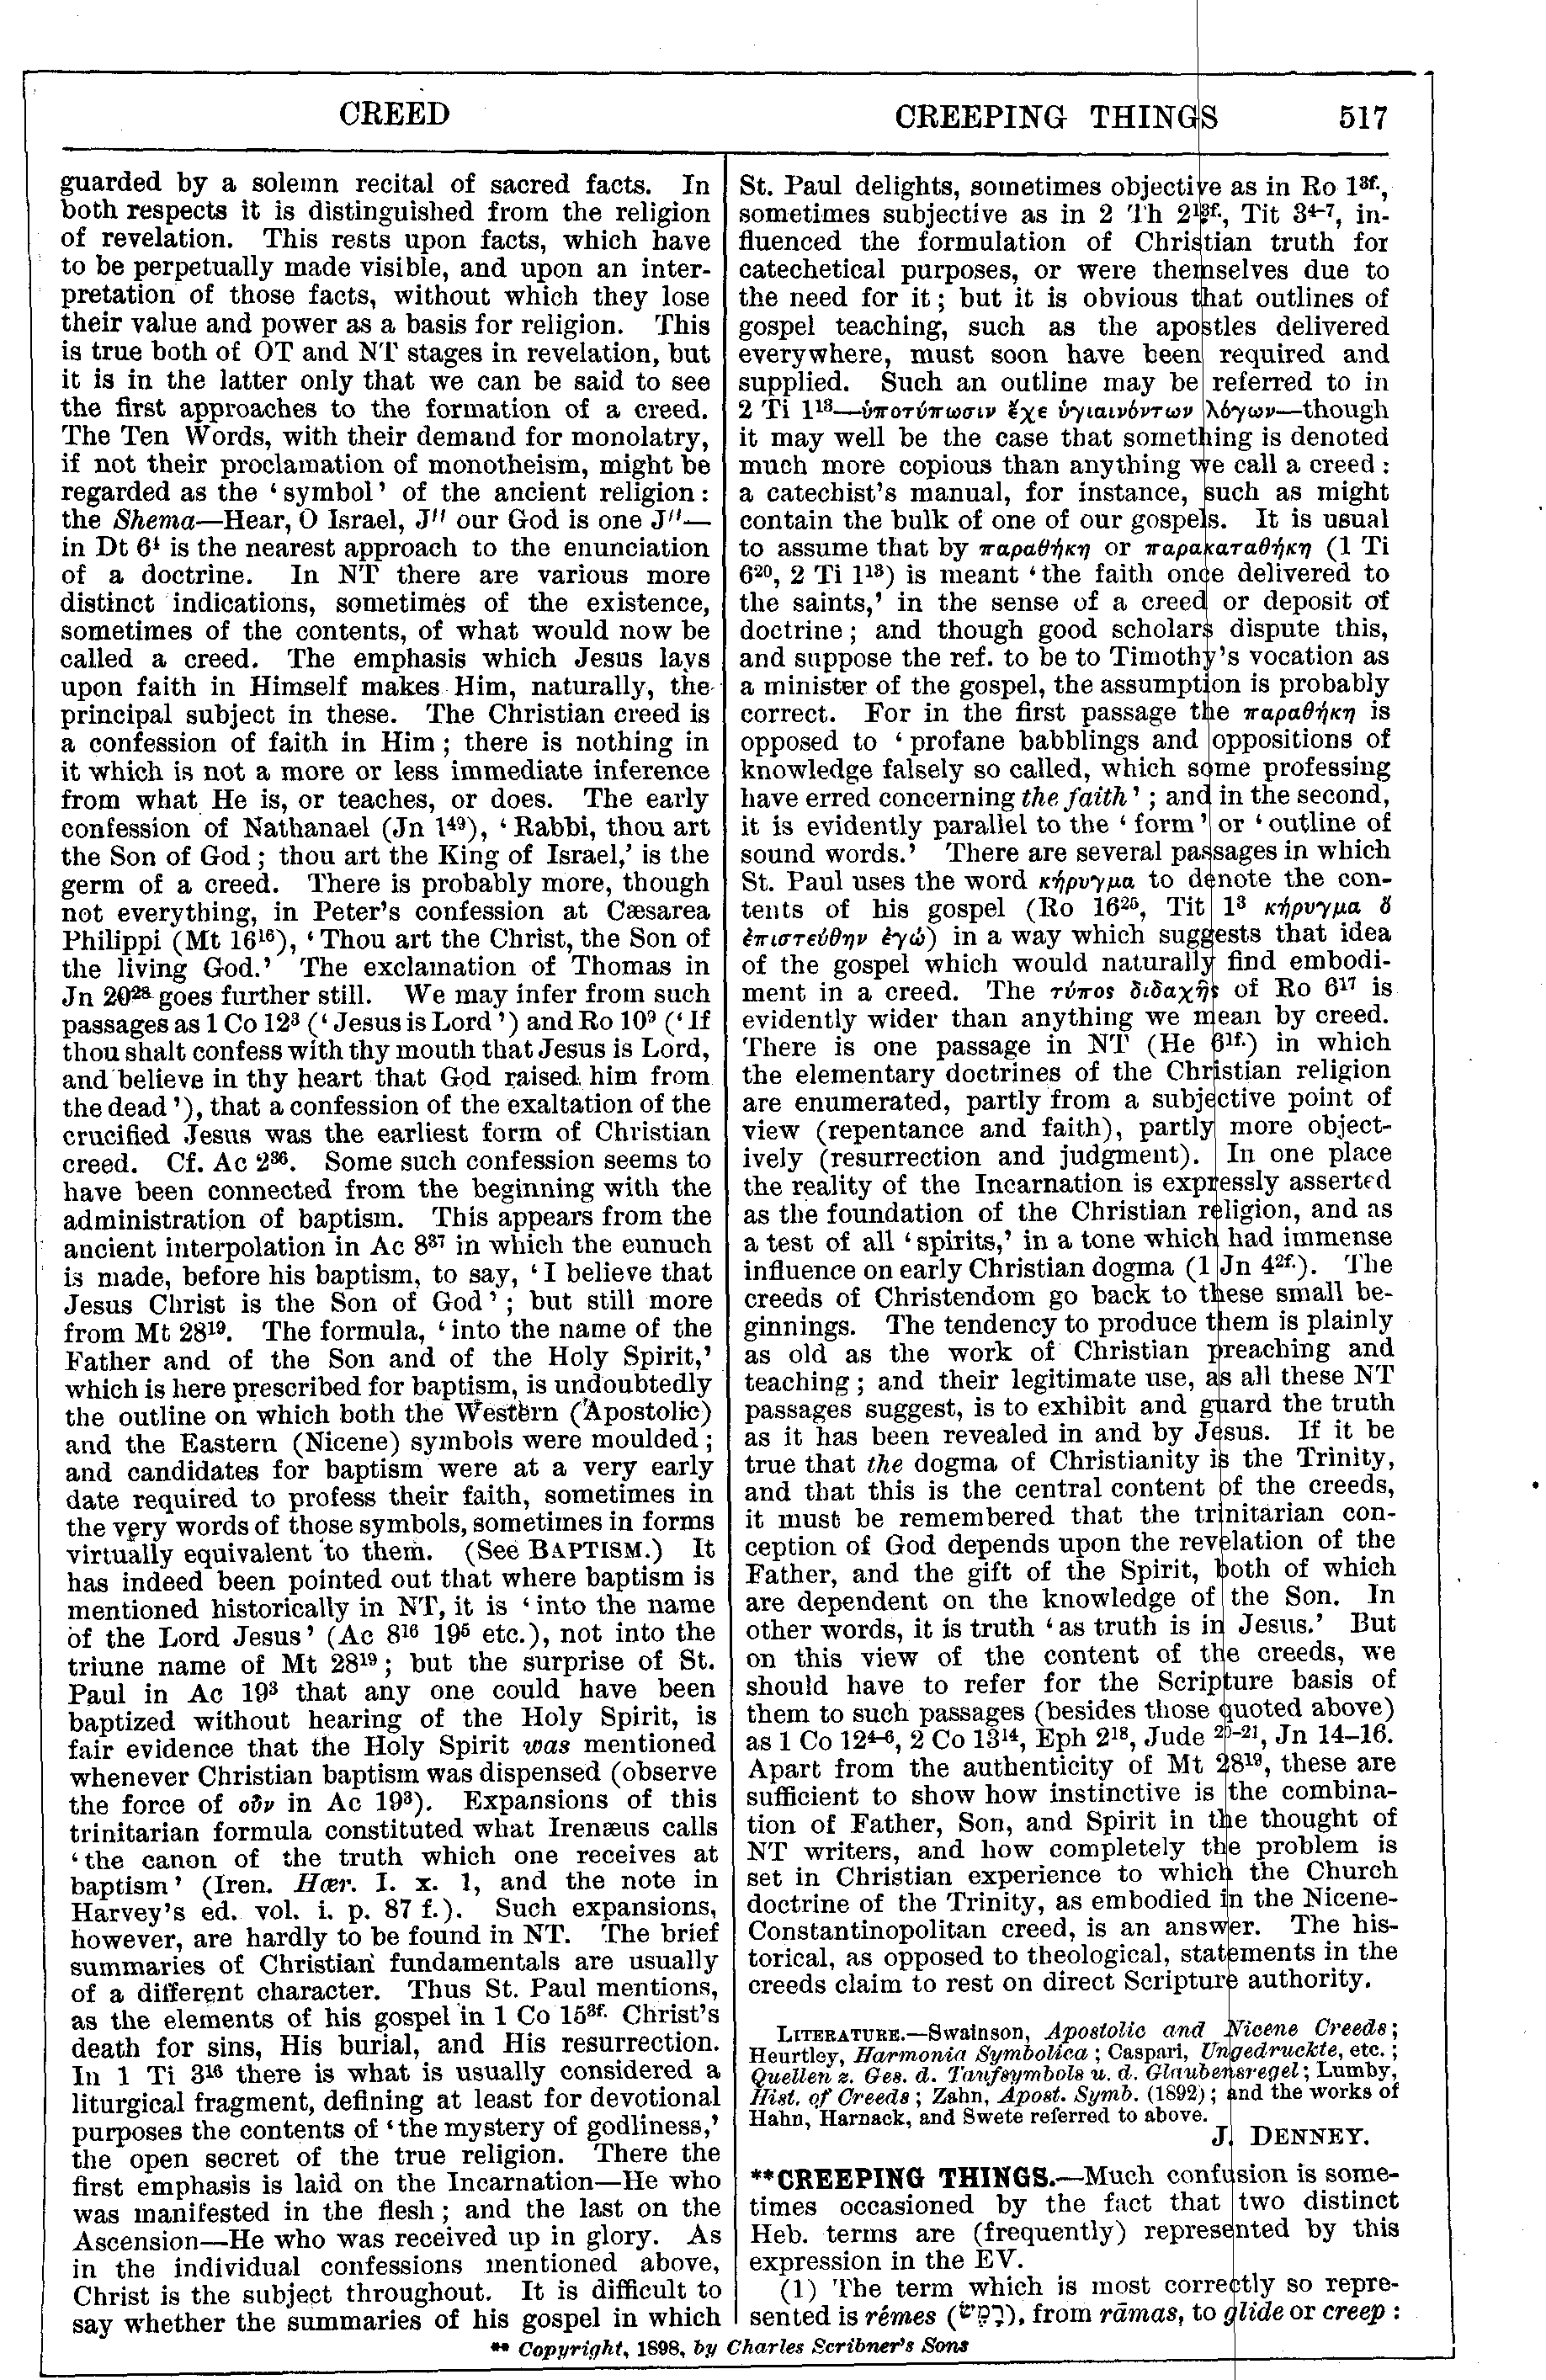 Image of page 517